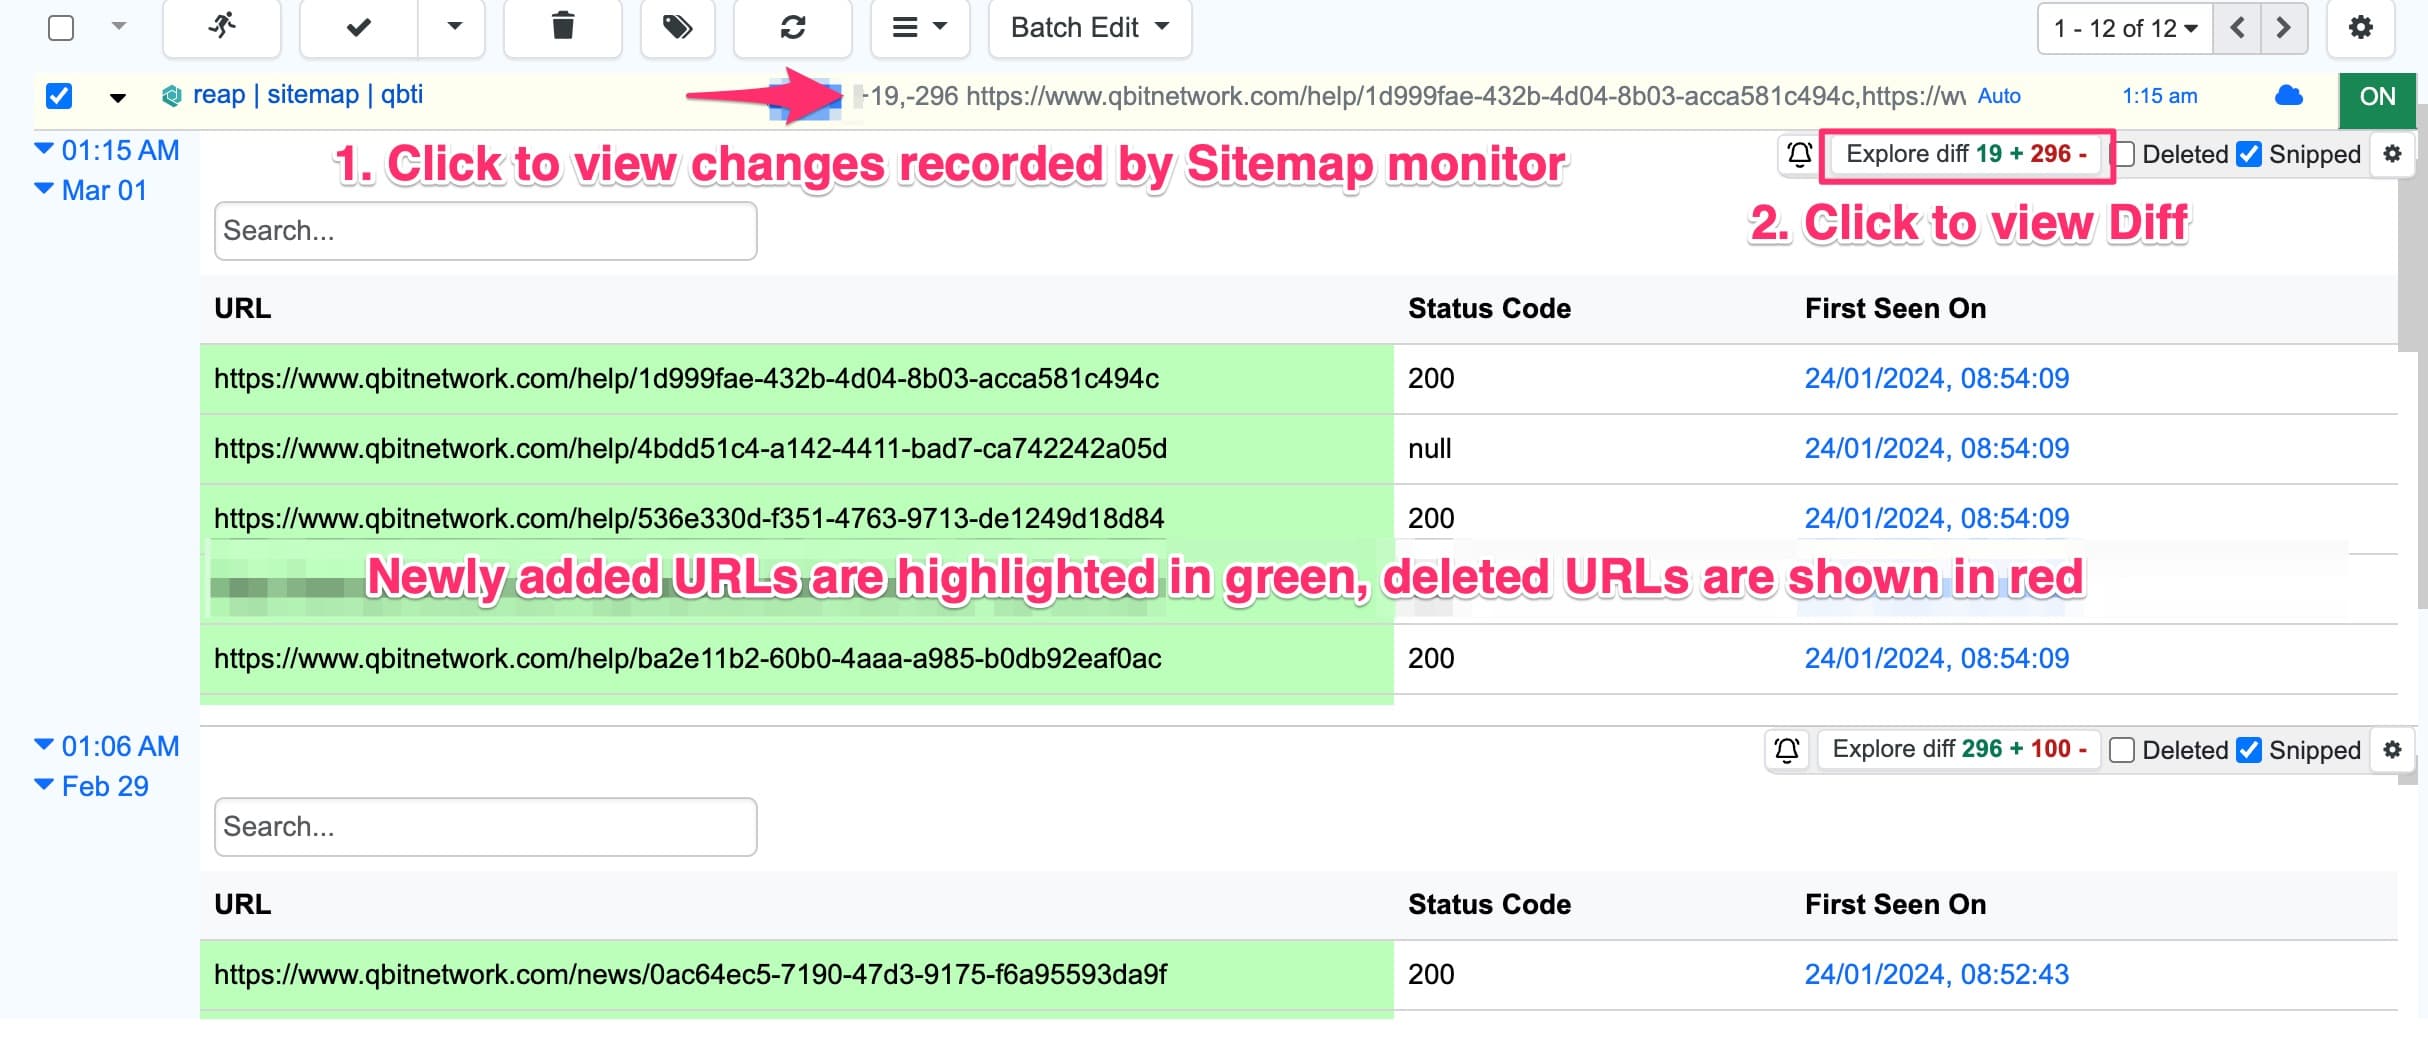 Change history of a sitemap monitor